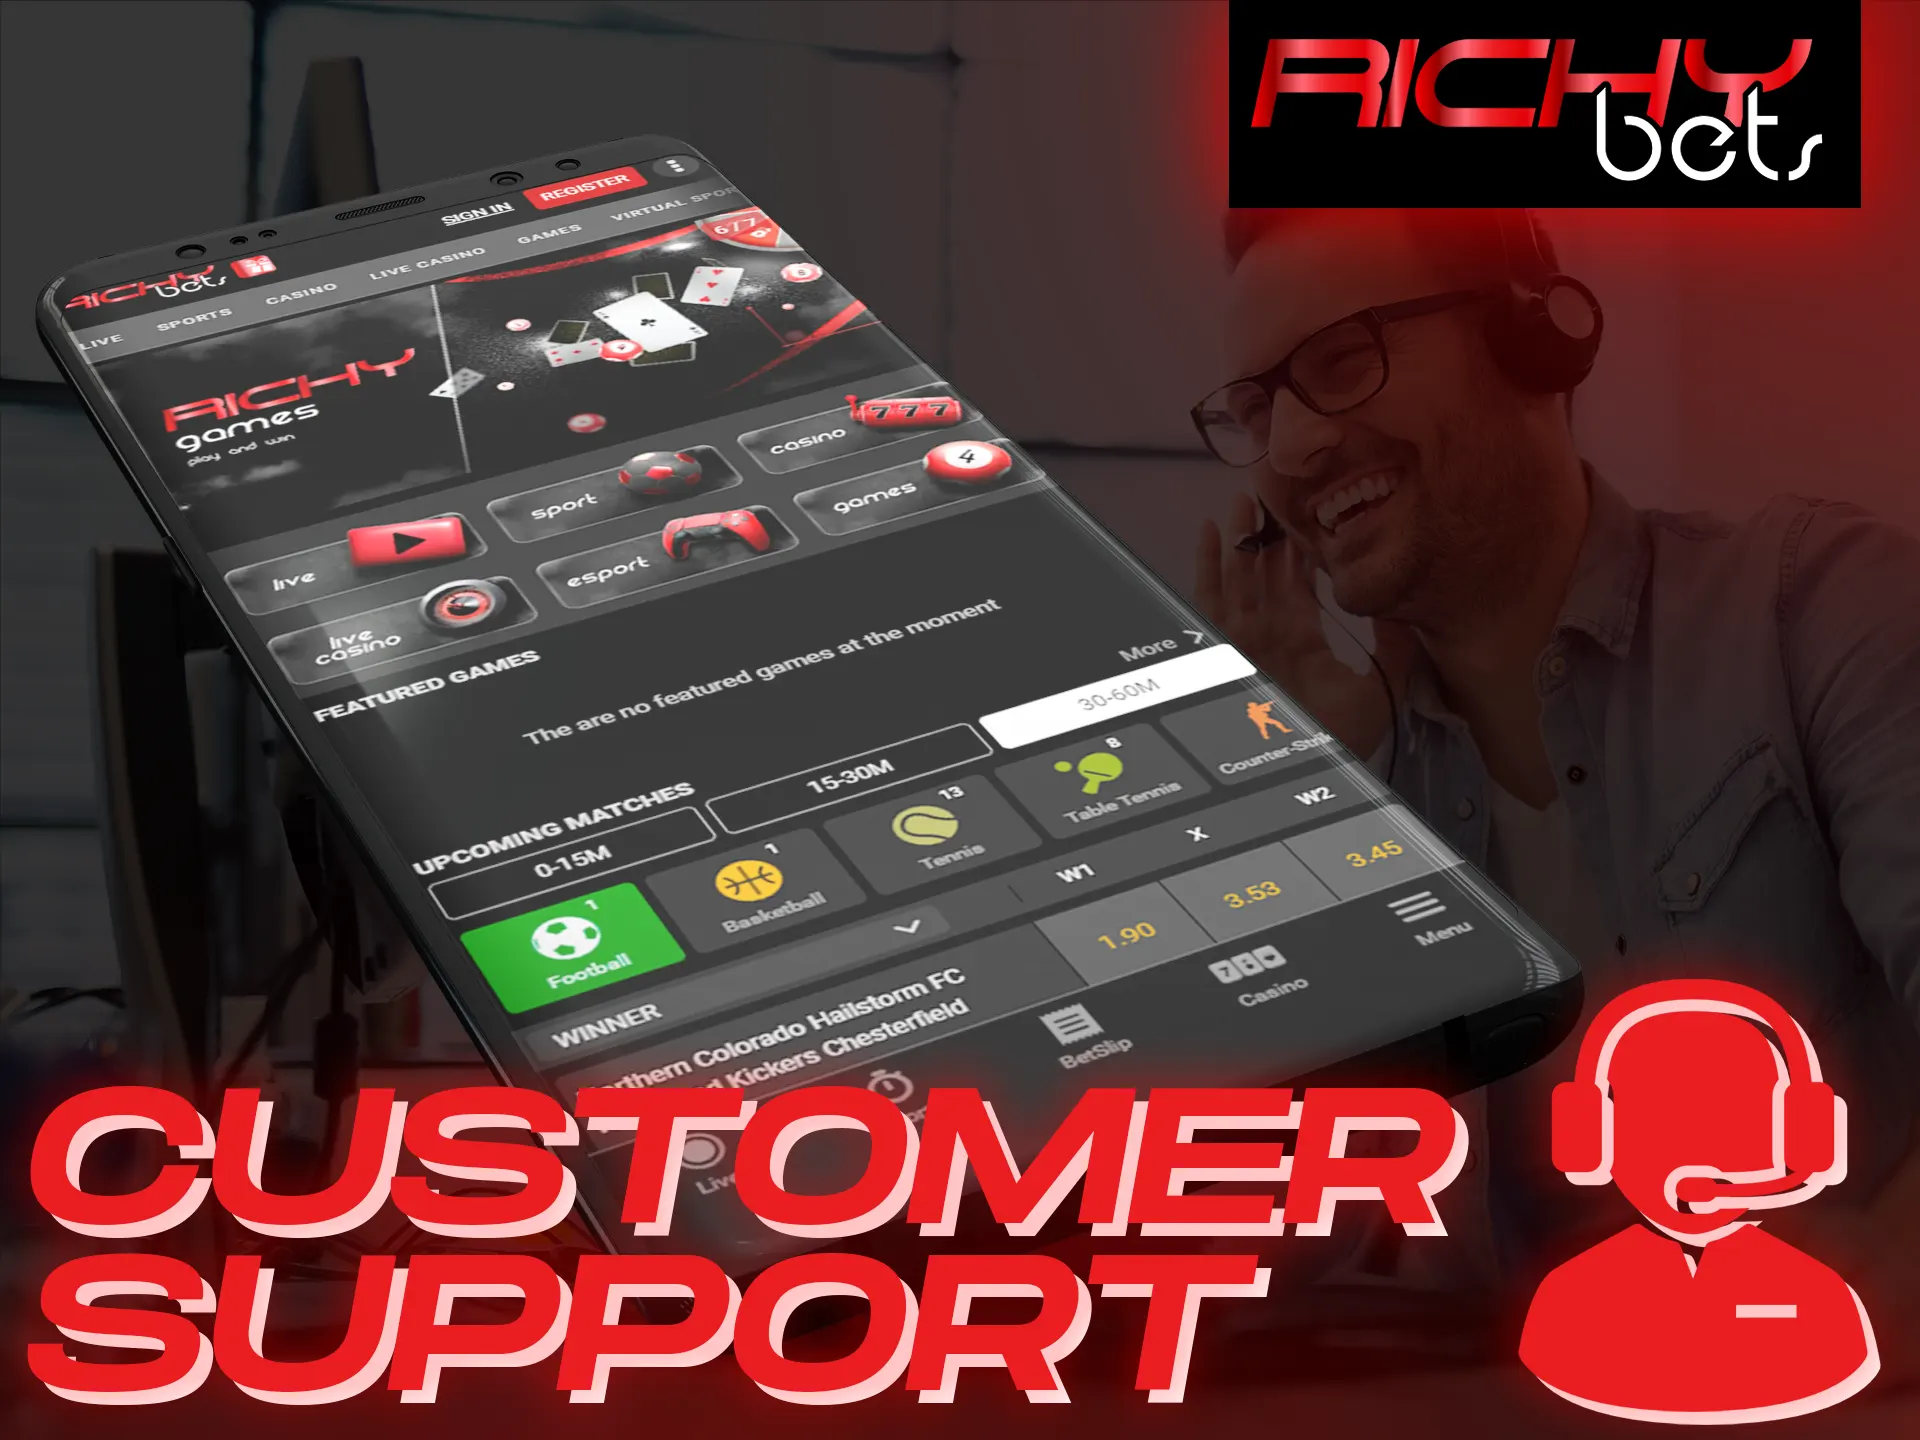 Ask any questions to Richybets support.